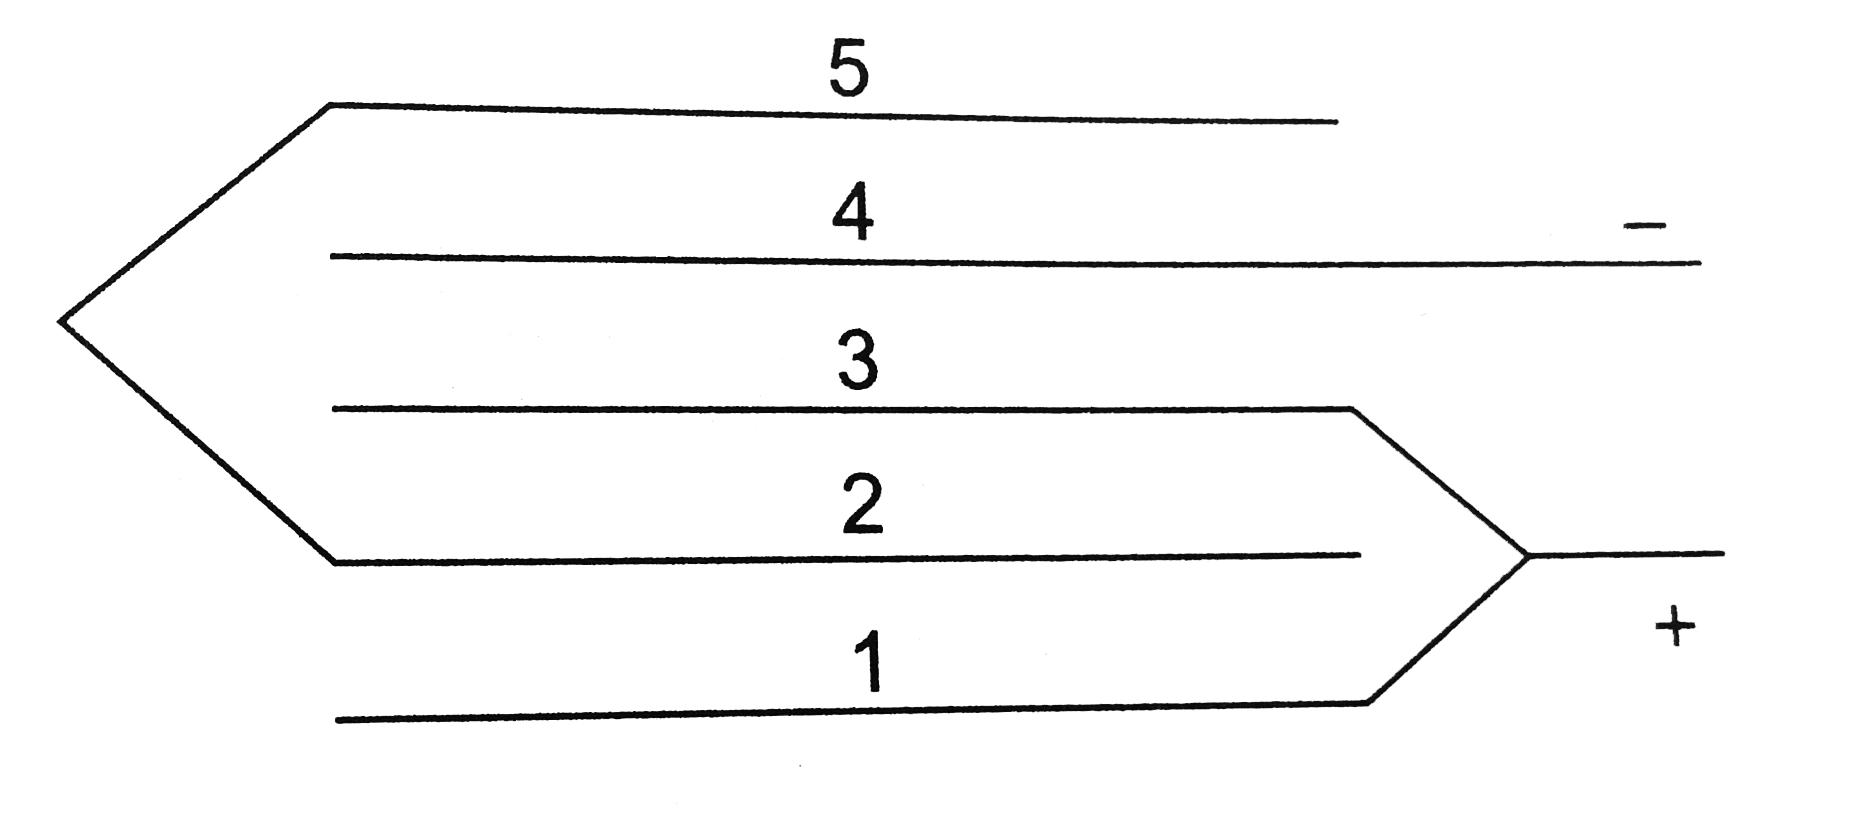 Five identical conducting plates, 1, 2,3,4 and 5 are fixed parallel pltes equidistant from each other (see figure). A conductor connects plates 2 and 5 while another conductor joins 1 and 3. The junction of 1 and 3 and the plate 4 are connected to a source of constant emf V0. Find      
(a) the effective capacity of the system between the terminals of source.  (b) the charges on the plates 3 and 5. Given, d = distance between any two successive plates and A =  area of either face of each plate.